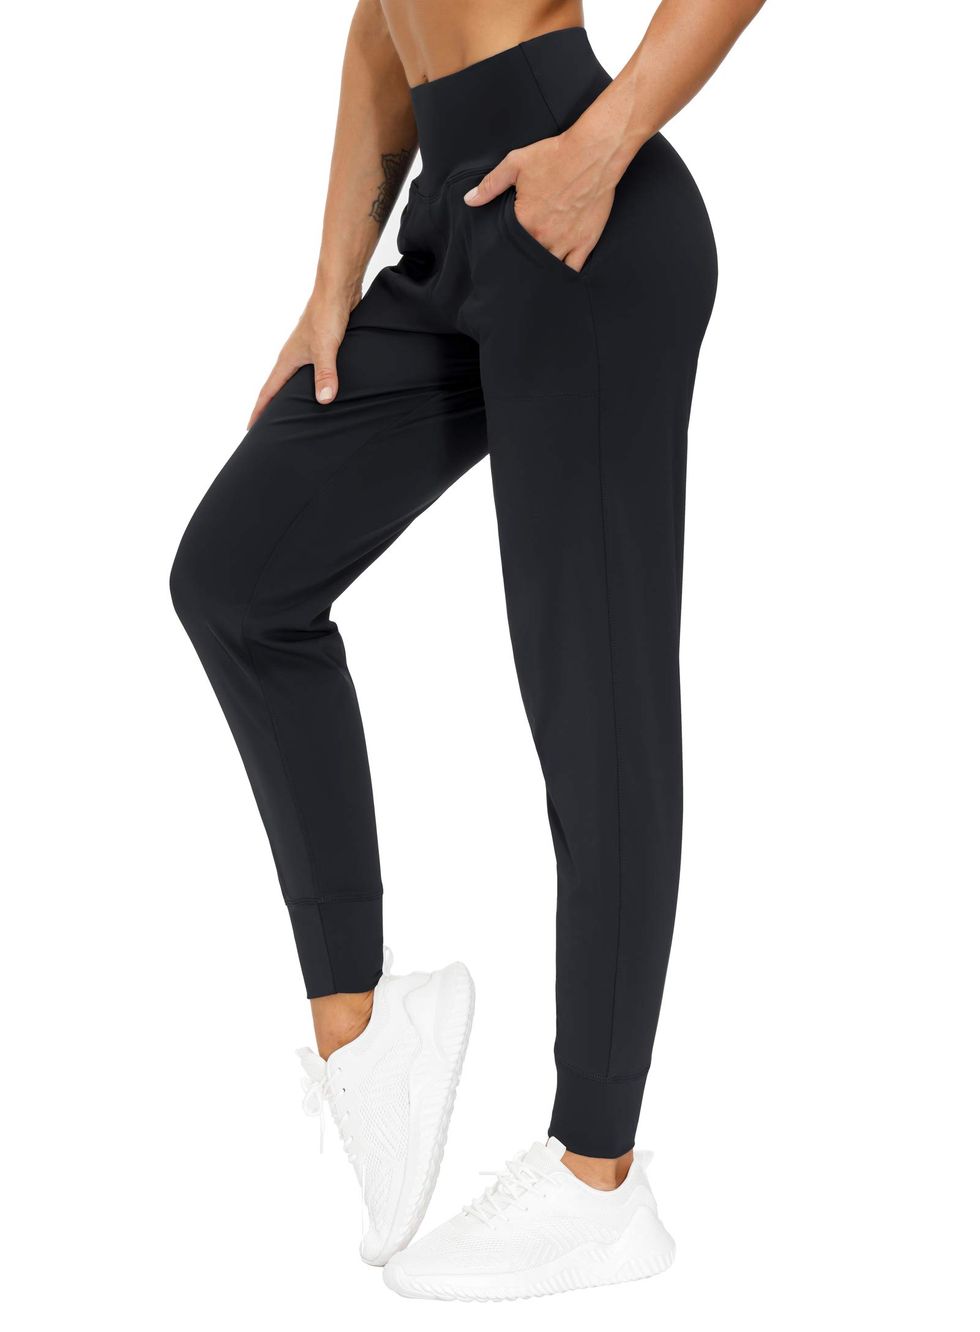 15 Leggings That Look and Feel Similar to Lululemon Align For Less - Parade